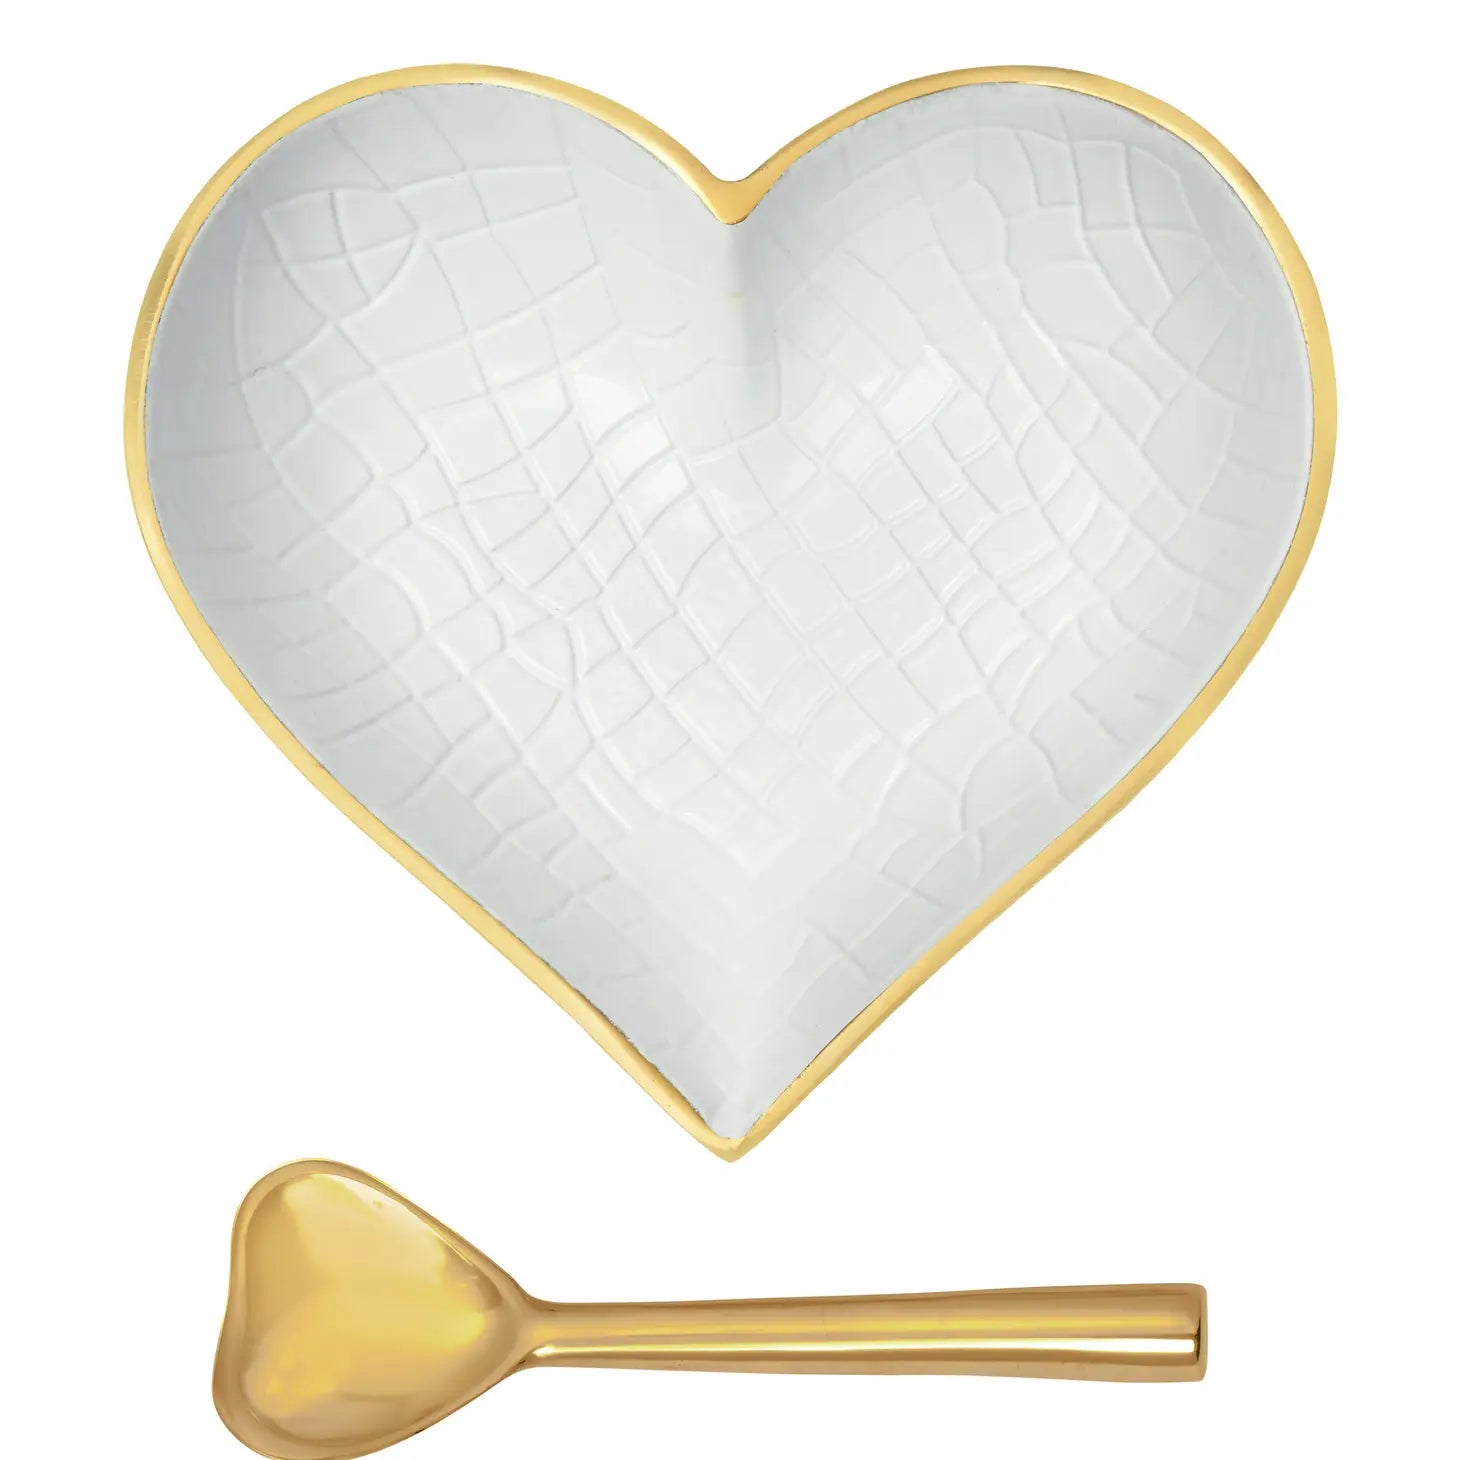 Gold & White Croco Heart with Gold Heart Spoon